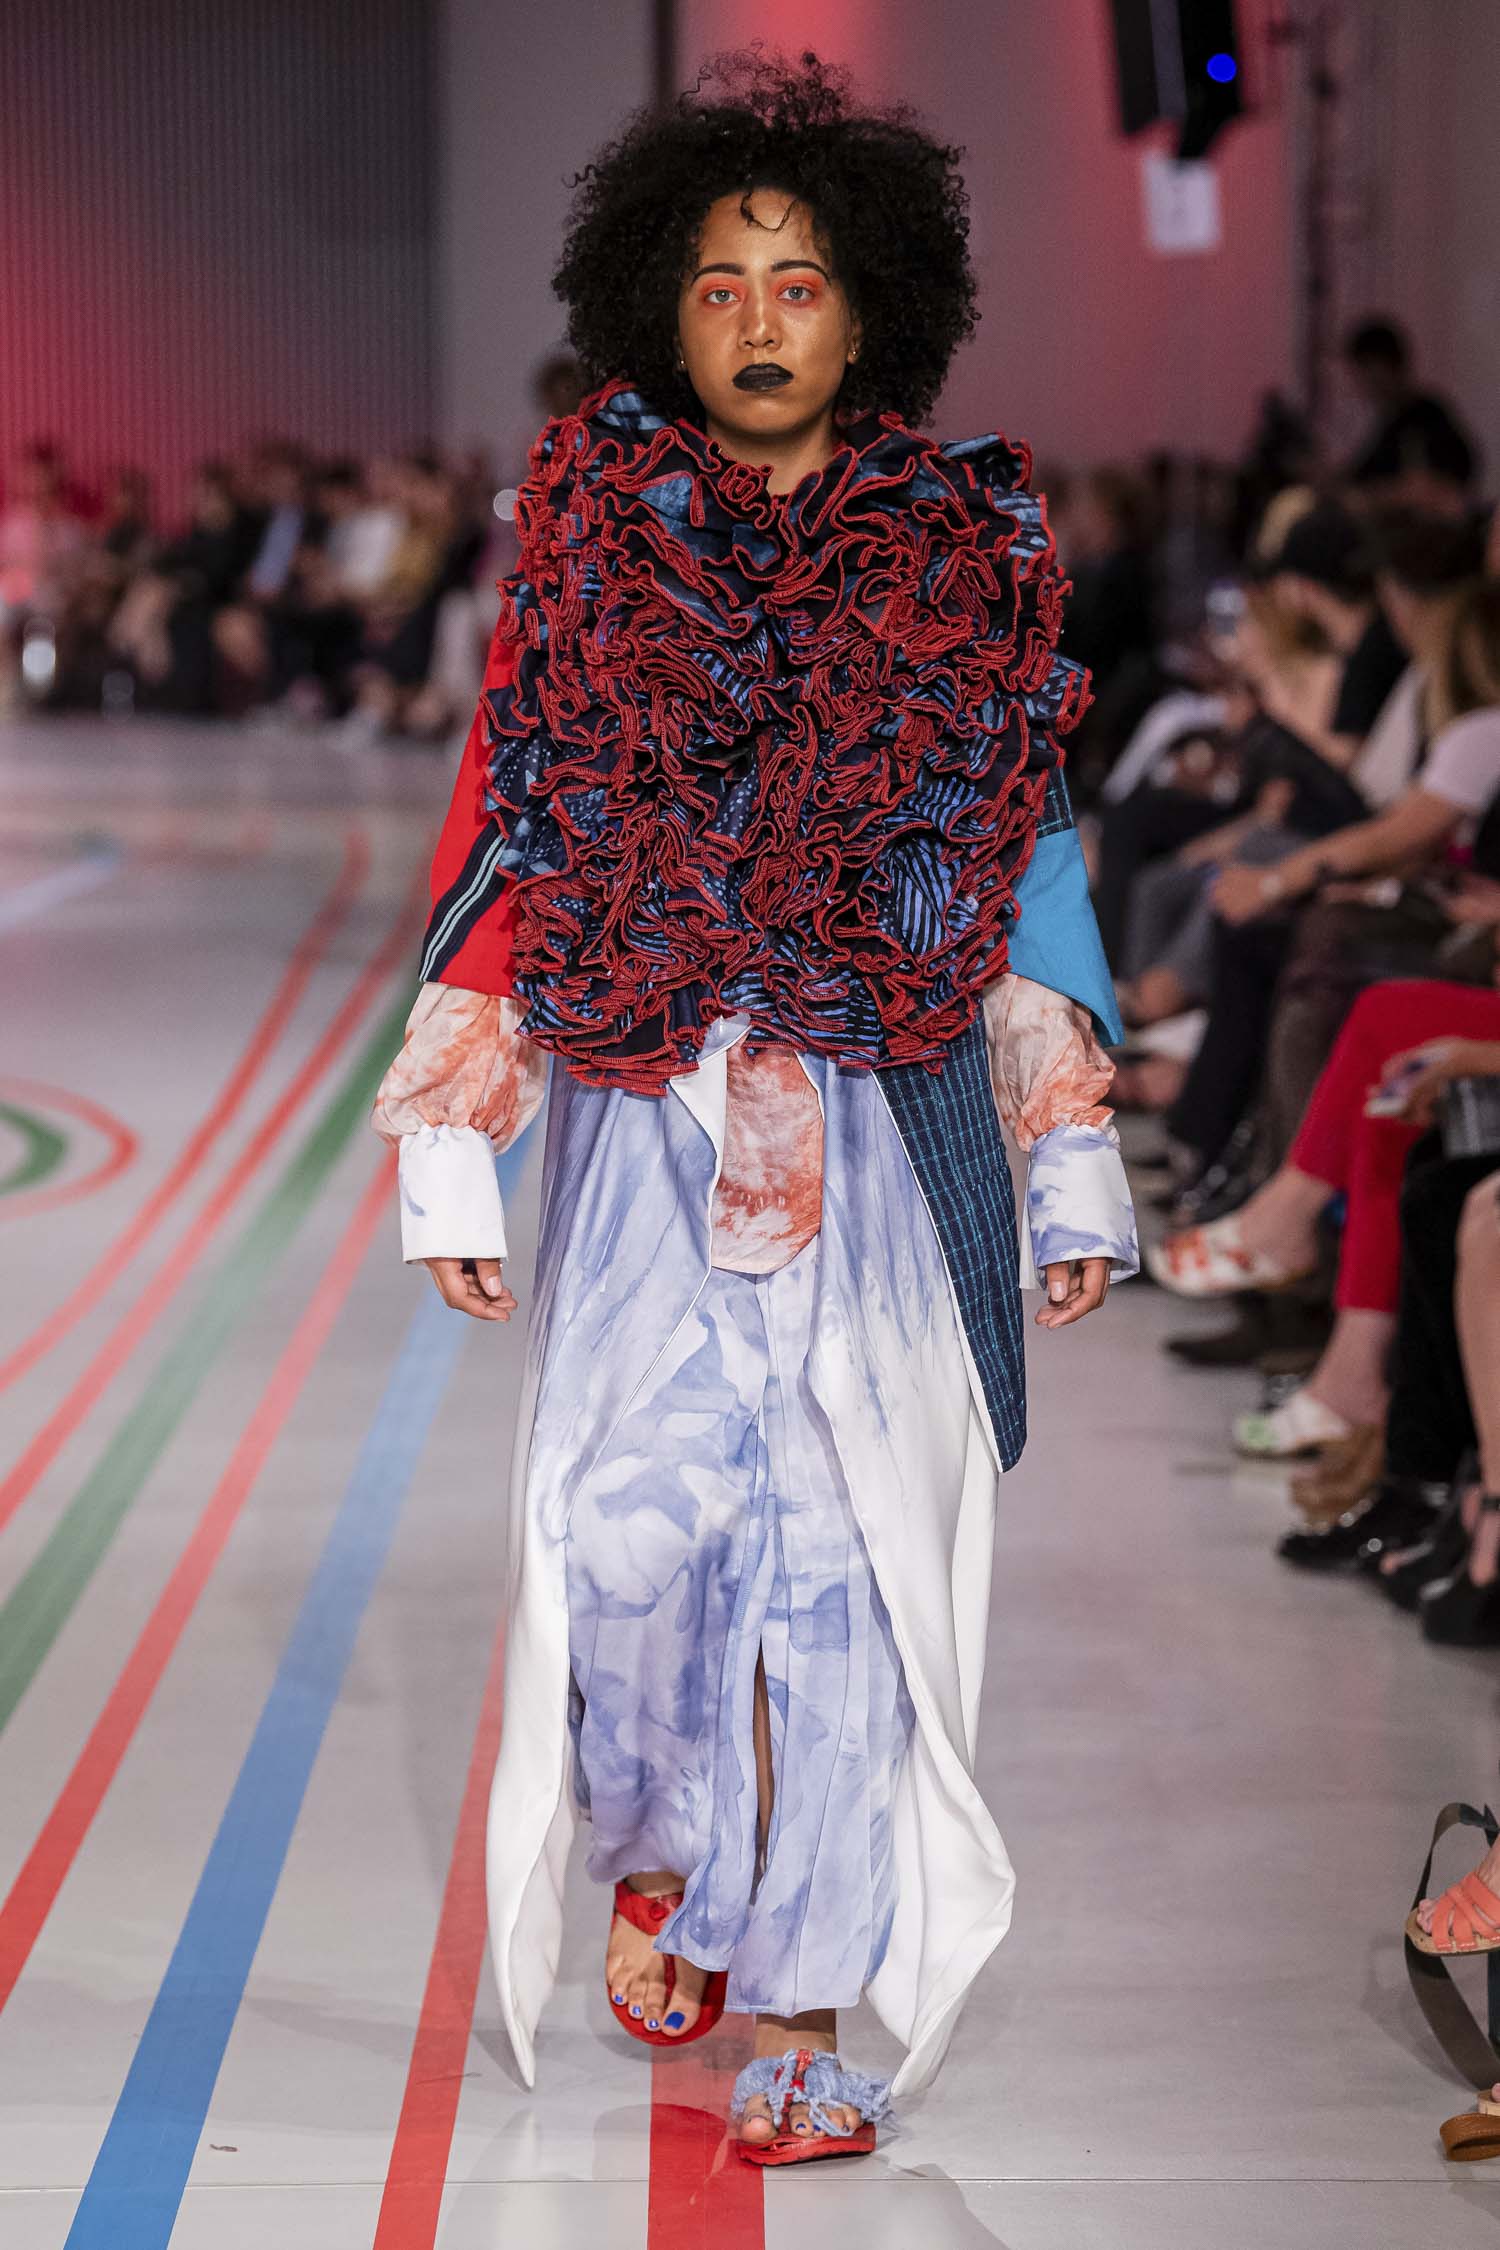 SHOW MODEKLASSE 19 : PHOTOS BY SALVATORE DRAGONE – A Shaded View on Fashion